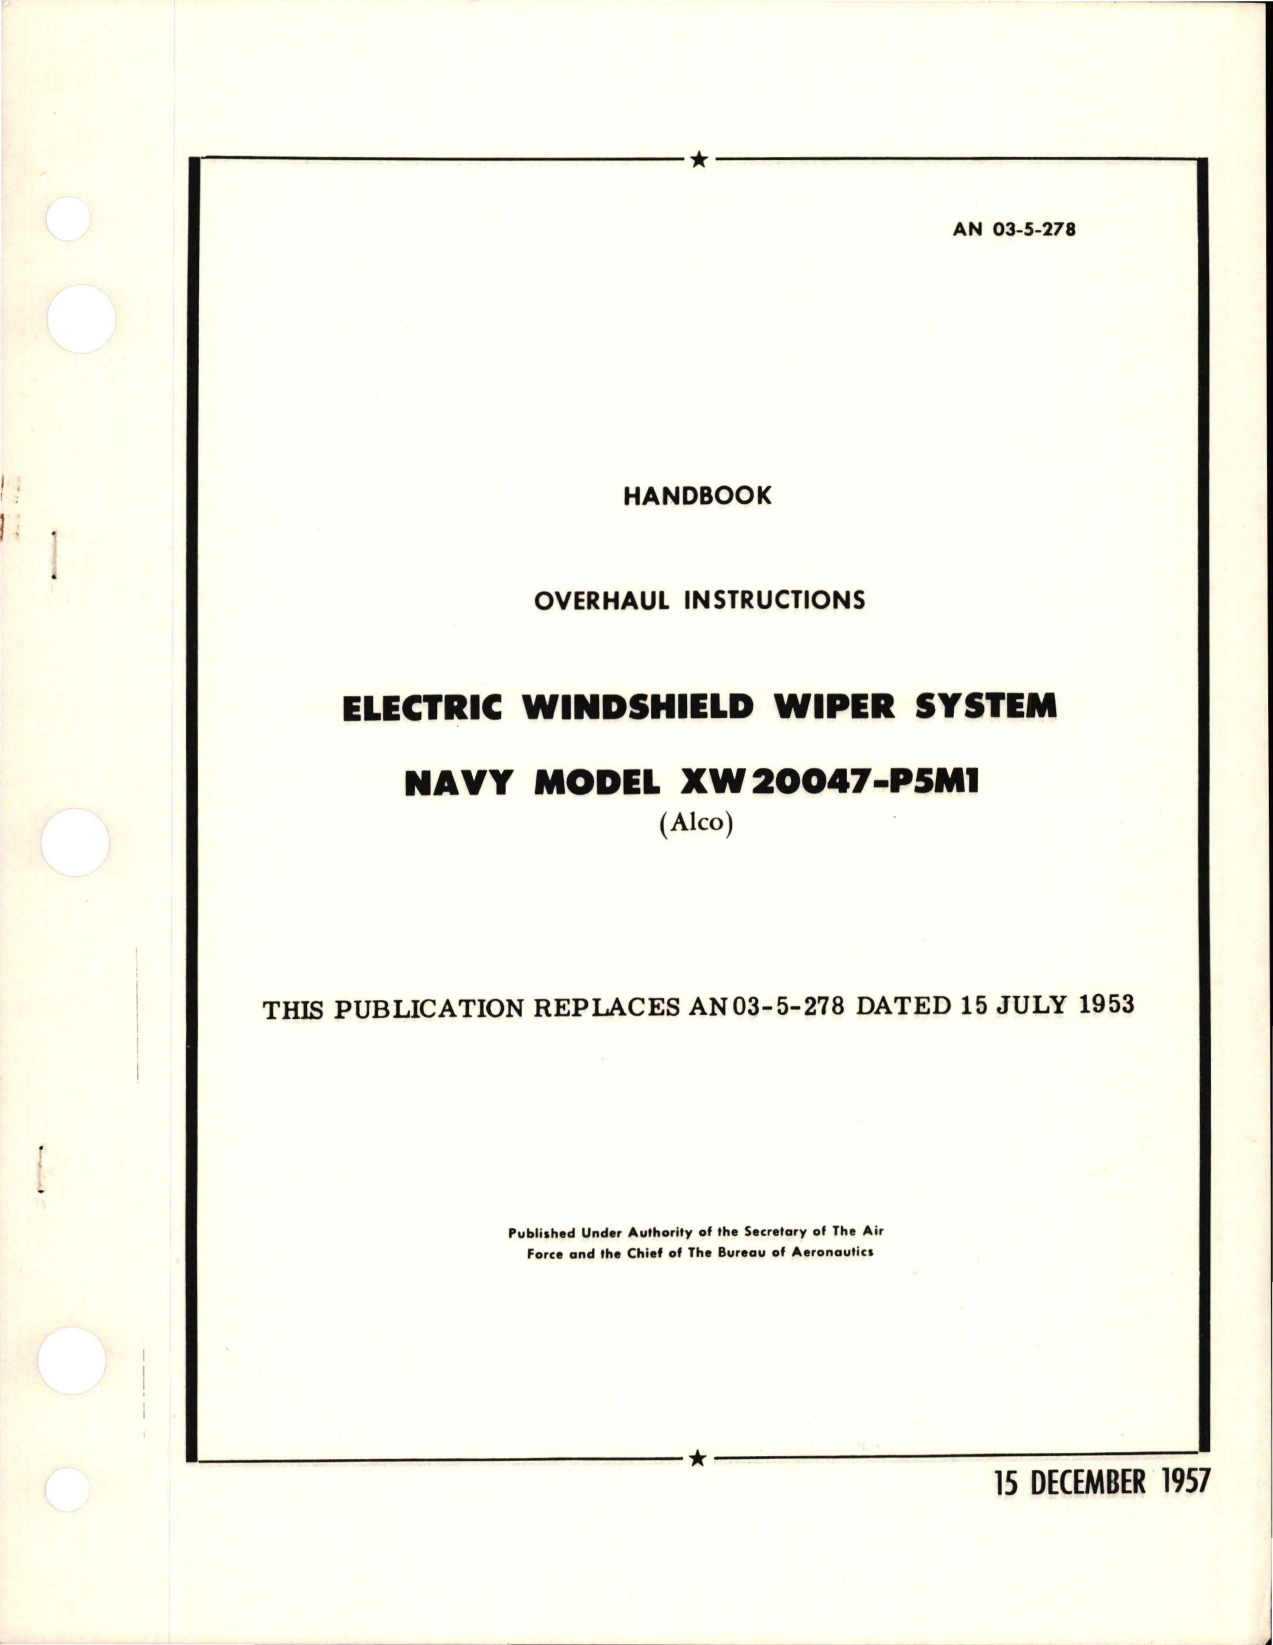 Sample page 1 from AirCorps Library document: Overhaul Instructions for Electric Windshield Wiper System - Model XW 20047-P5M1 